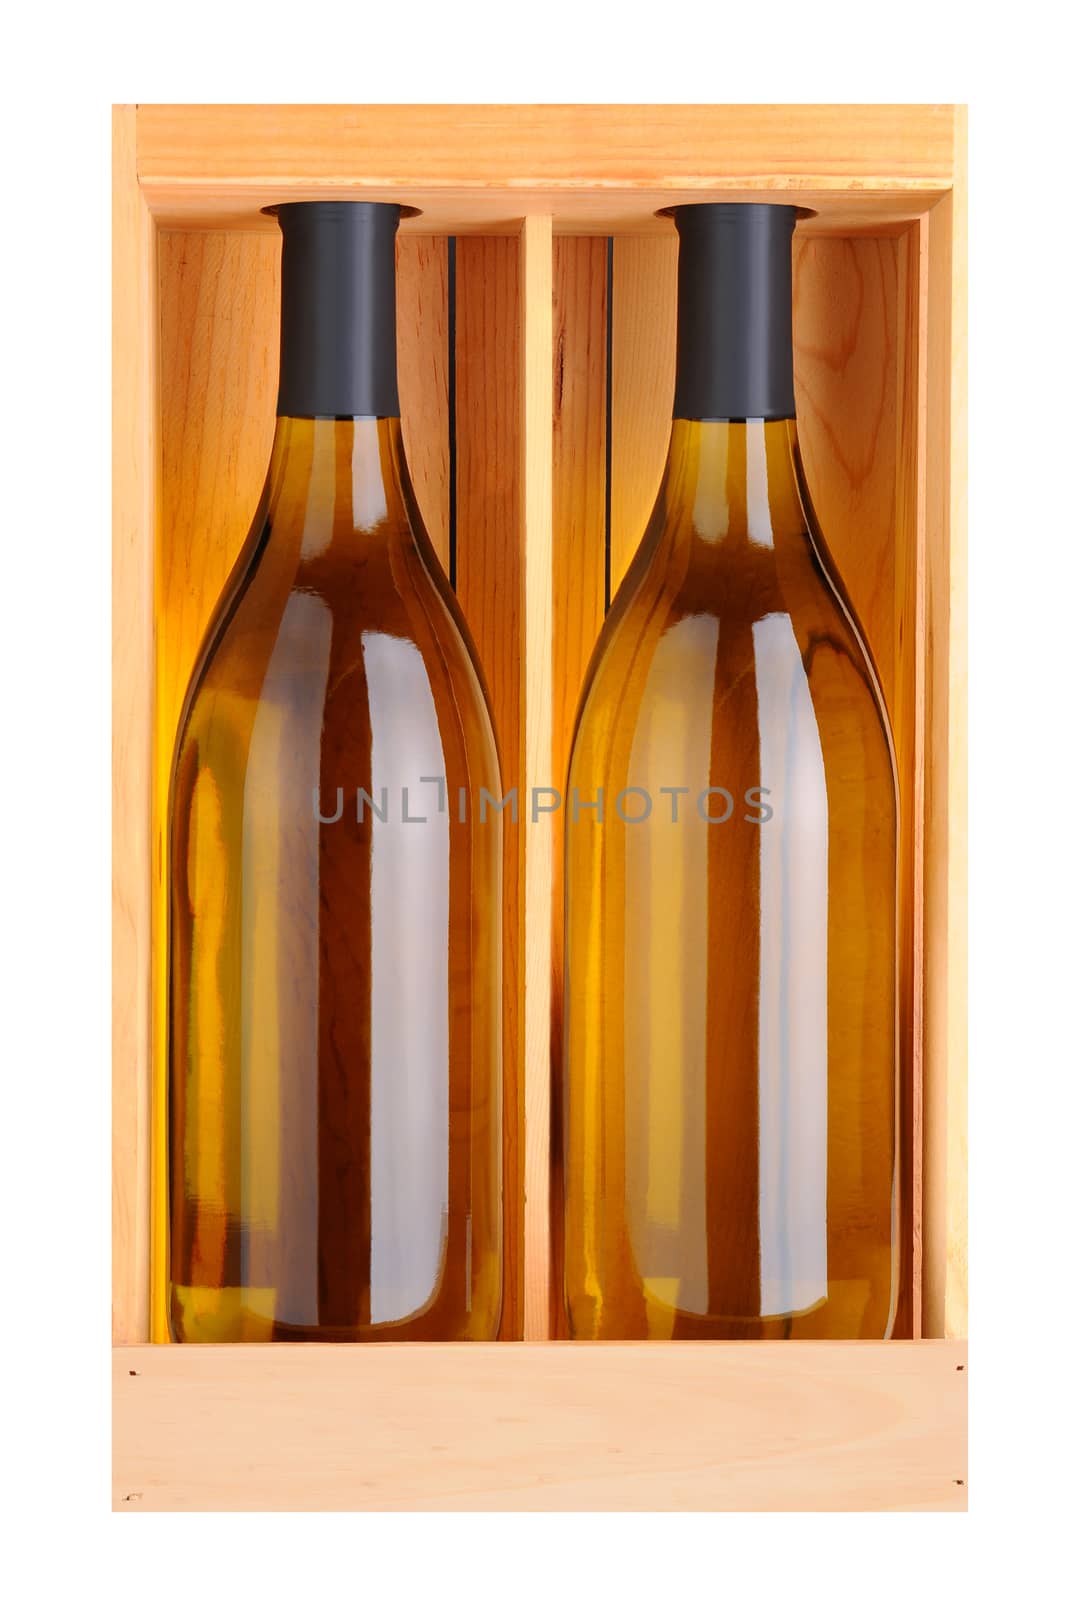 Two Chardonnay Bottles in Wood Box by sCukrov